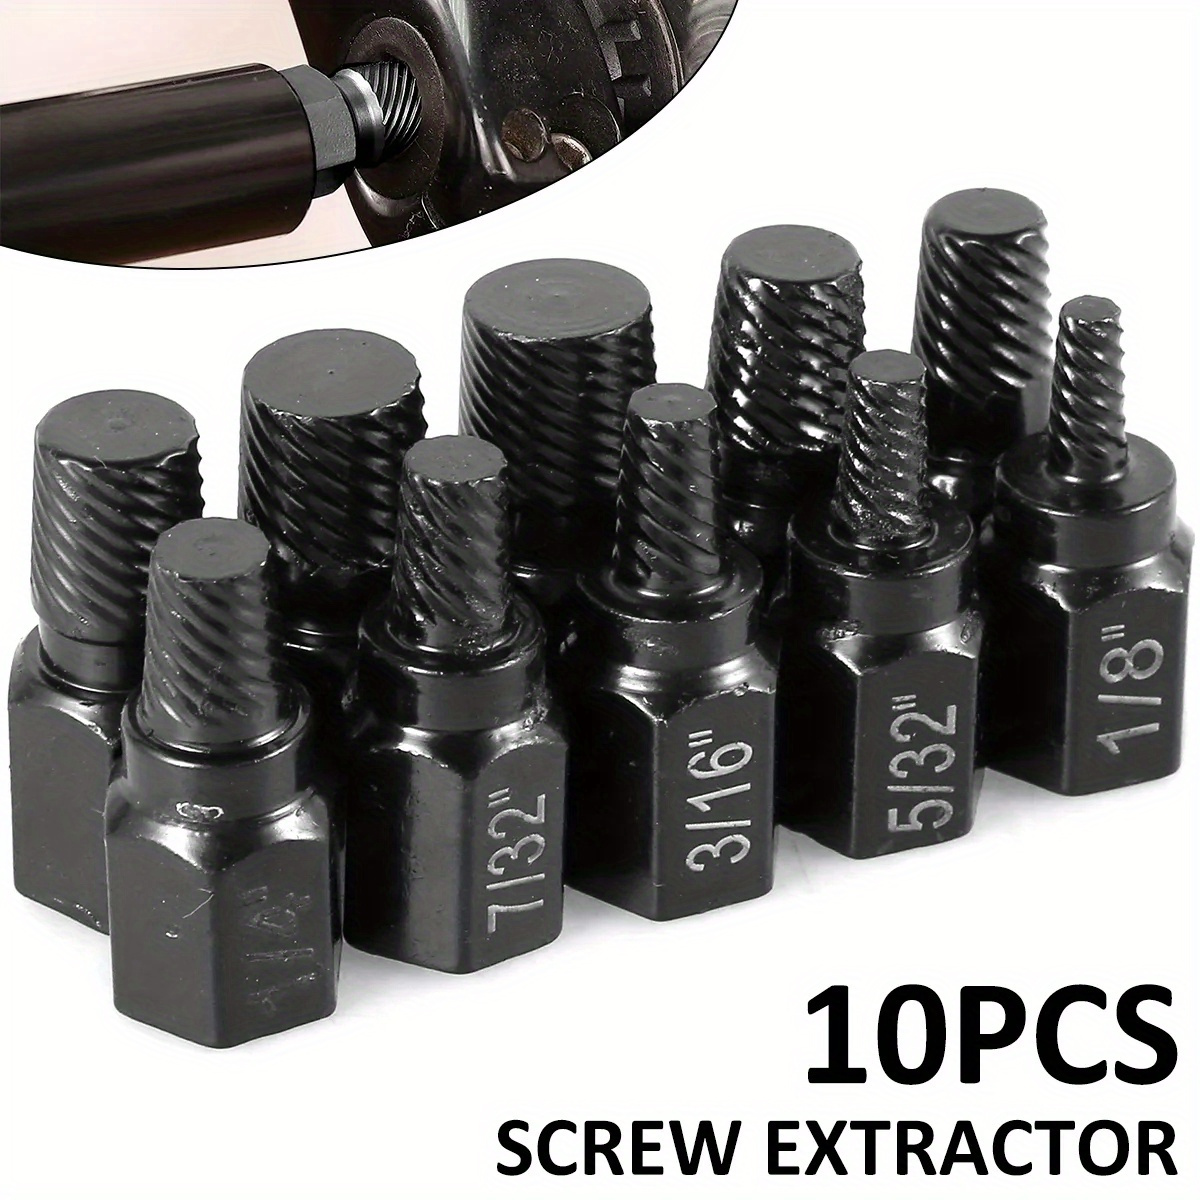 

10pcs Screw Extractor Kit Alloy Steel Damaged Screw Remover Screw Extractor Set Metal Easy Out Drill Bit Bolt Stud Multiple Spline